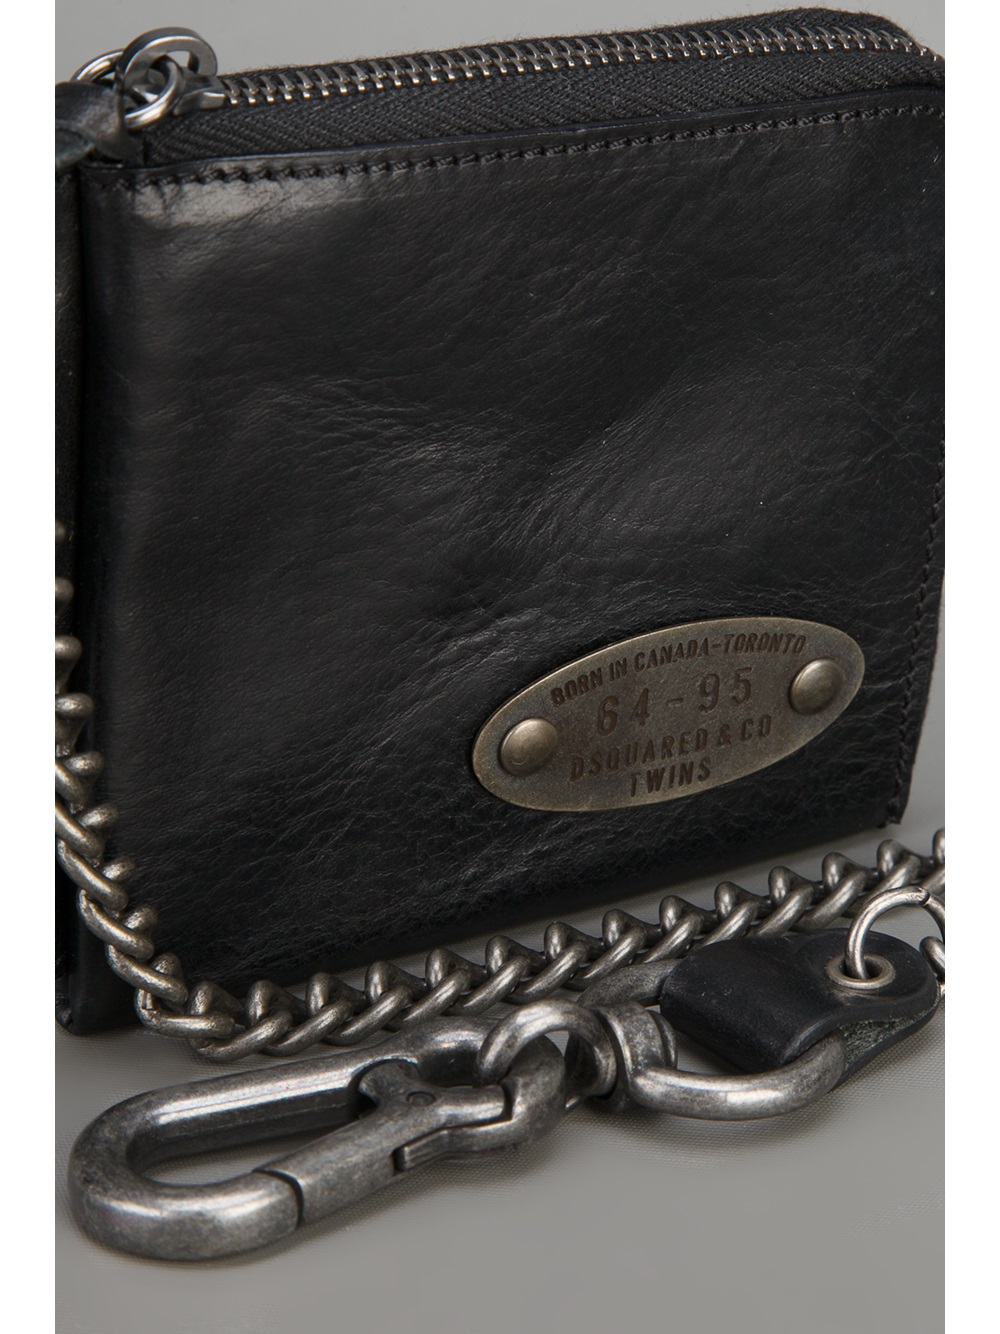 DSquared² Chain Wallet in Black for Men - Lyst